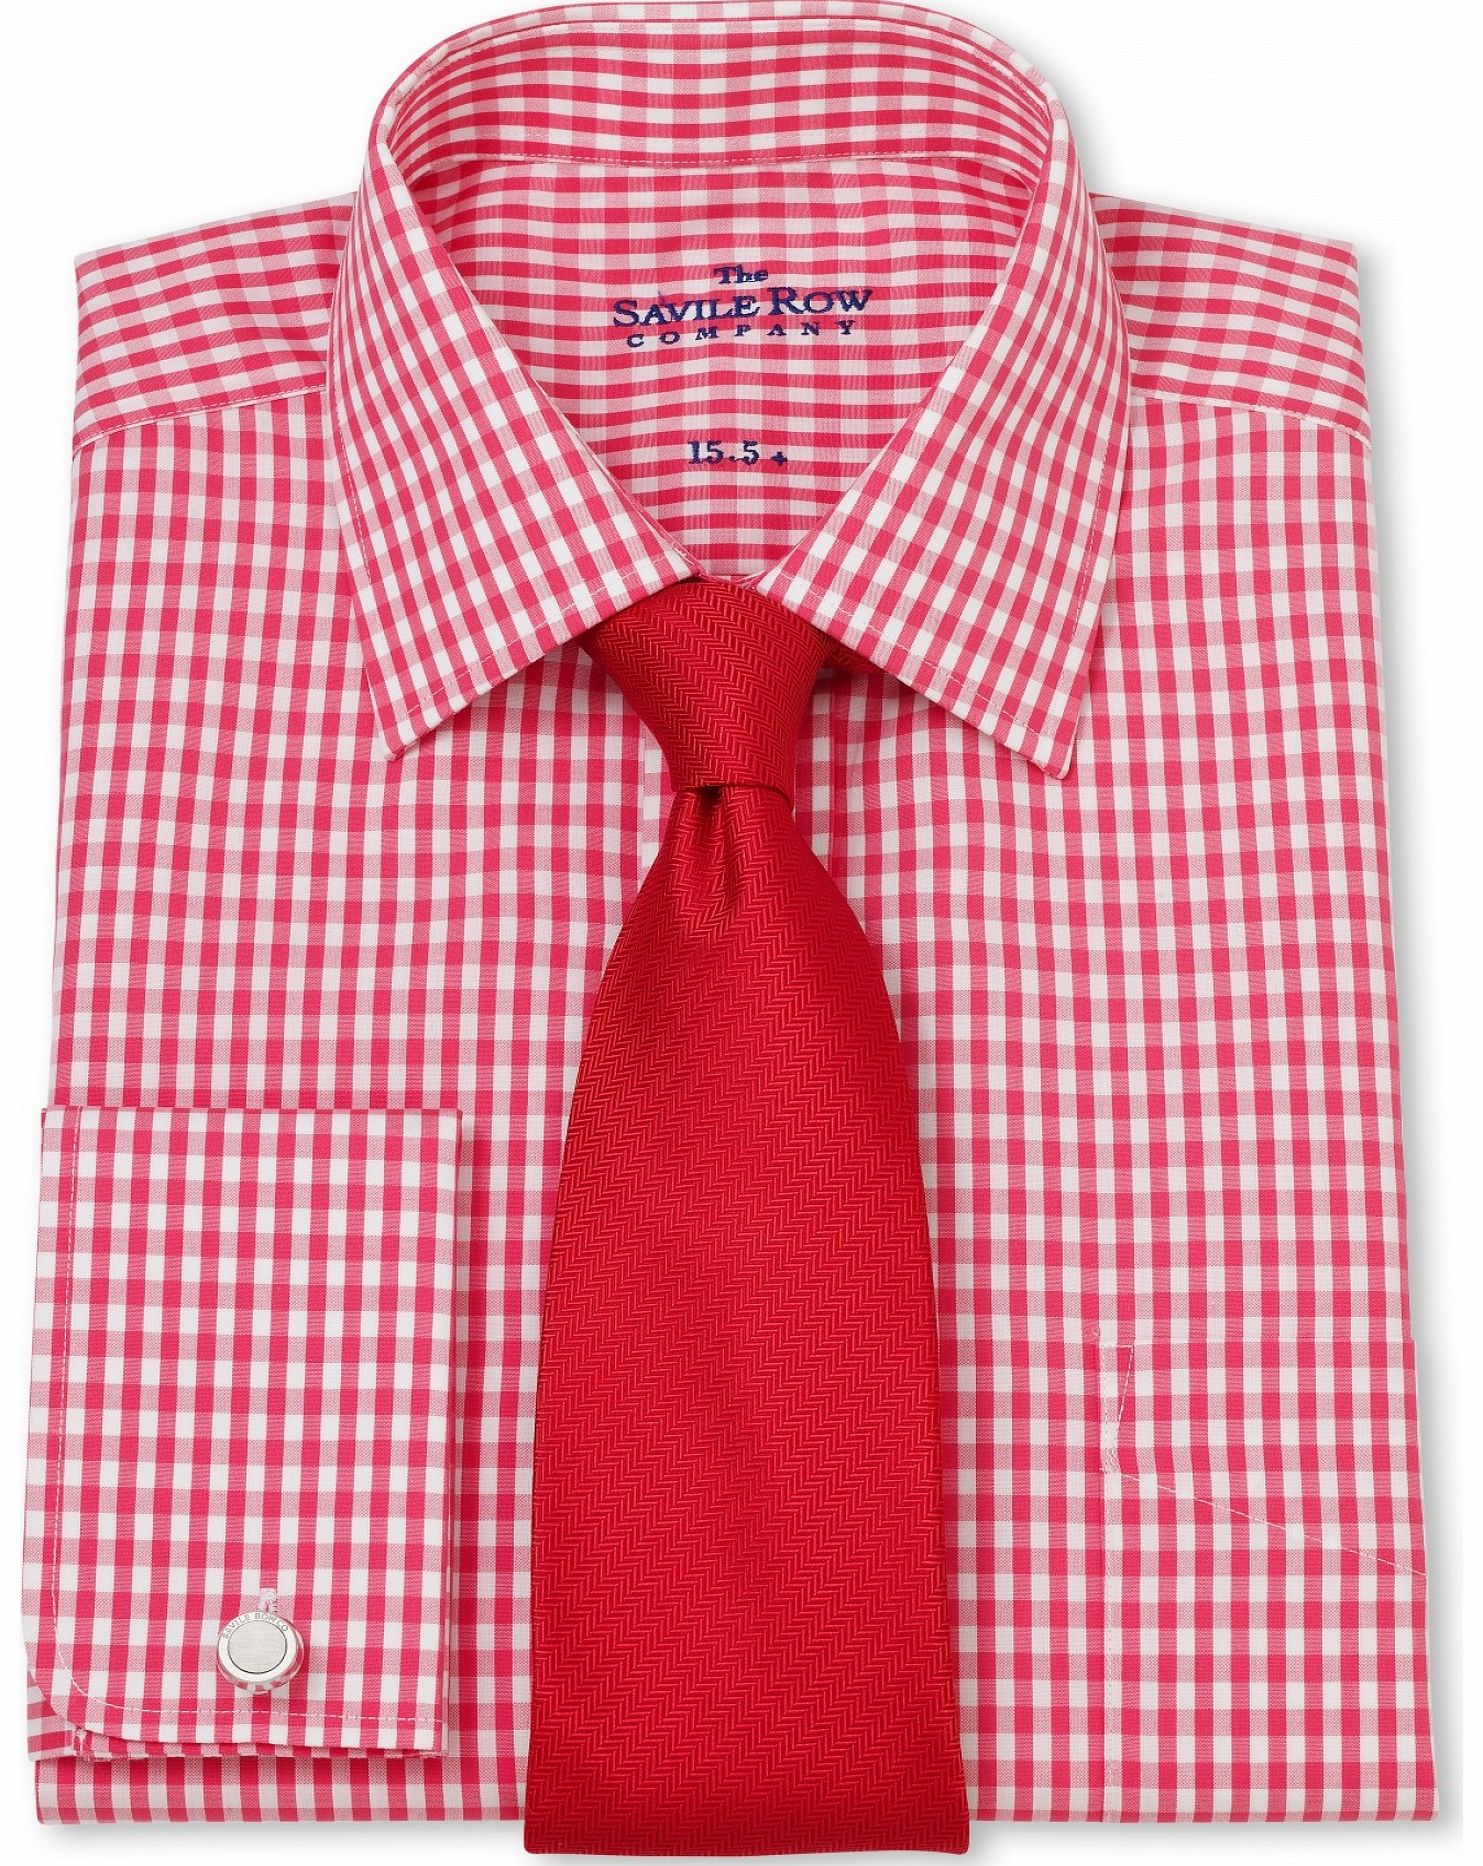 Savile Row Company Pink White Gingham Check Classic Fit Shirt 16``